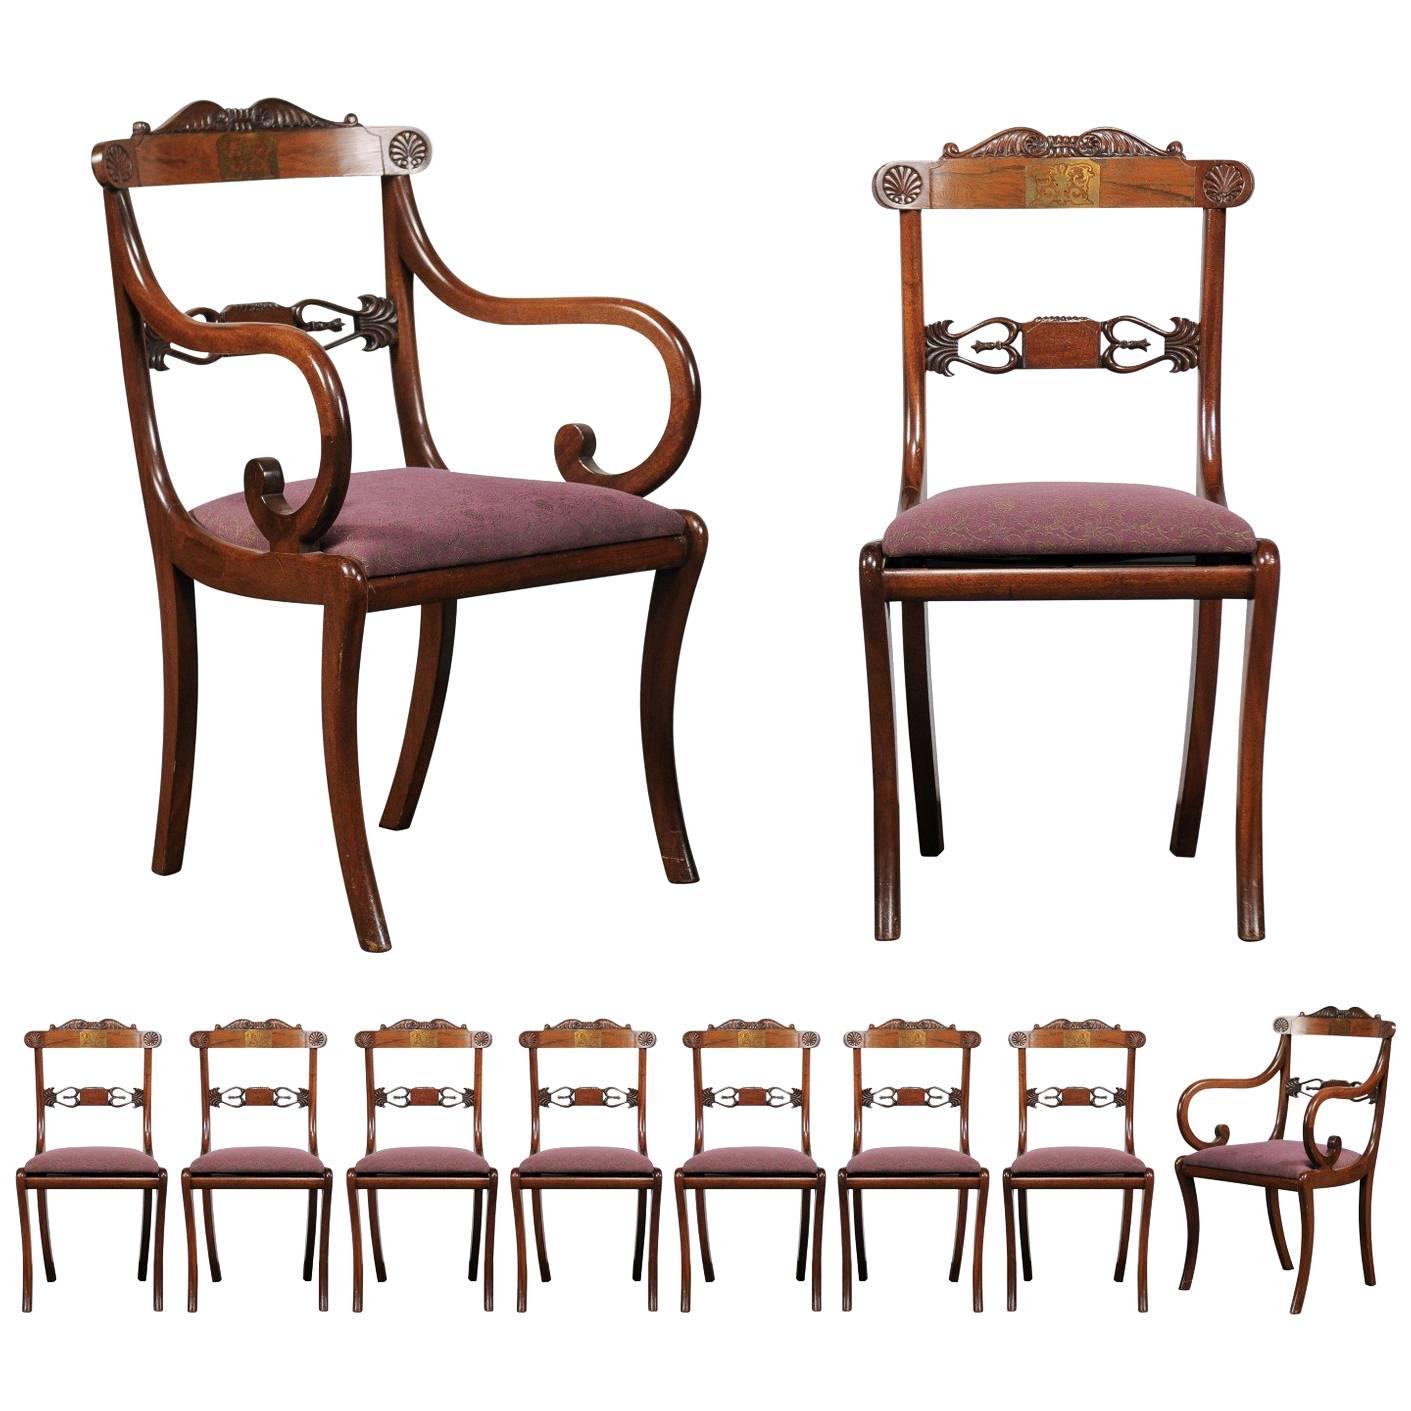 Set of Ten Regency Style Dining Chairs, Rosewood, Mahogany and Brass Inlay